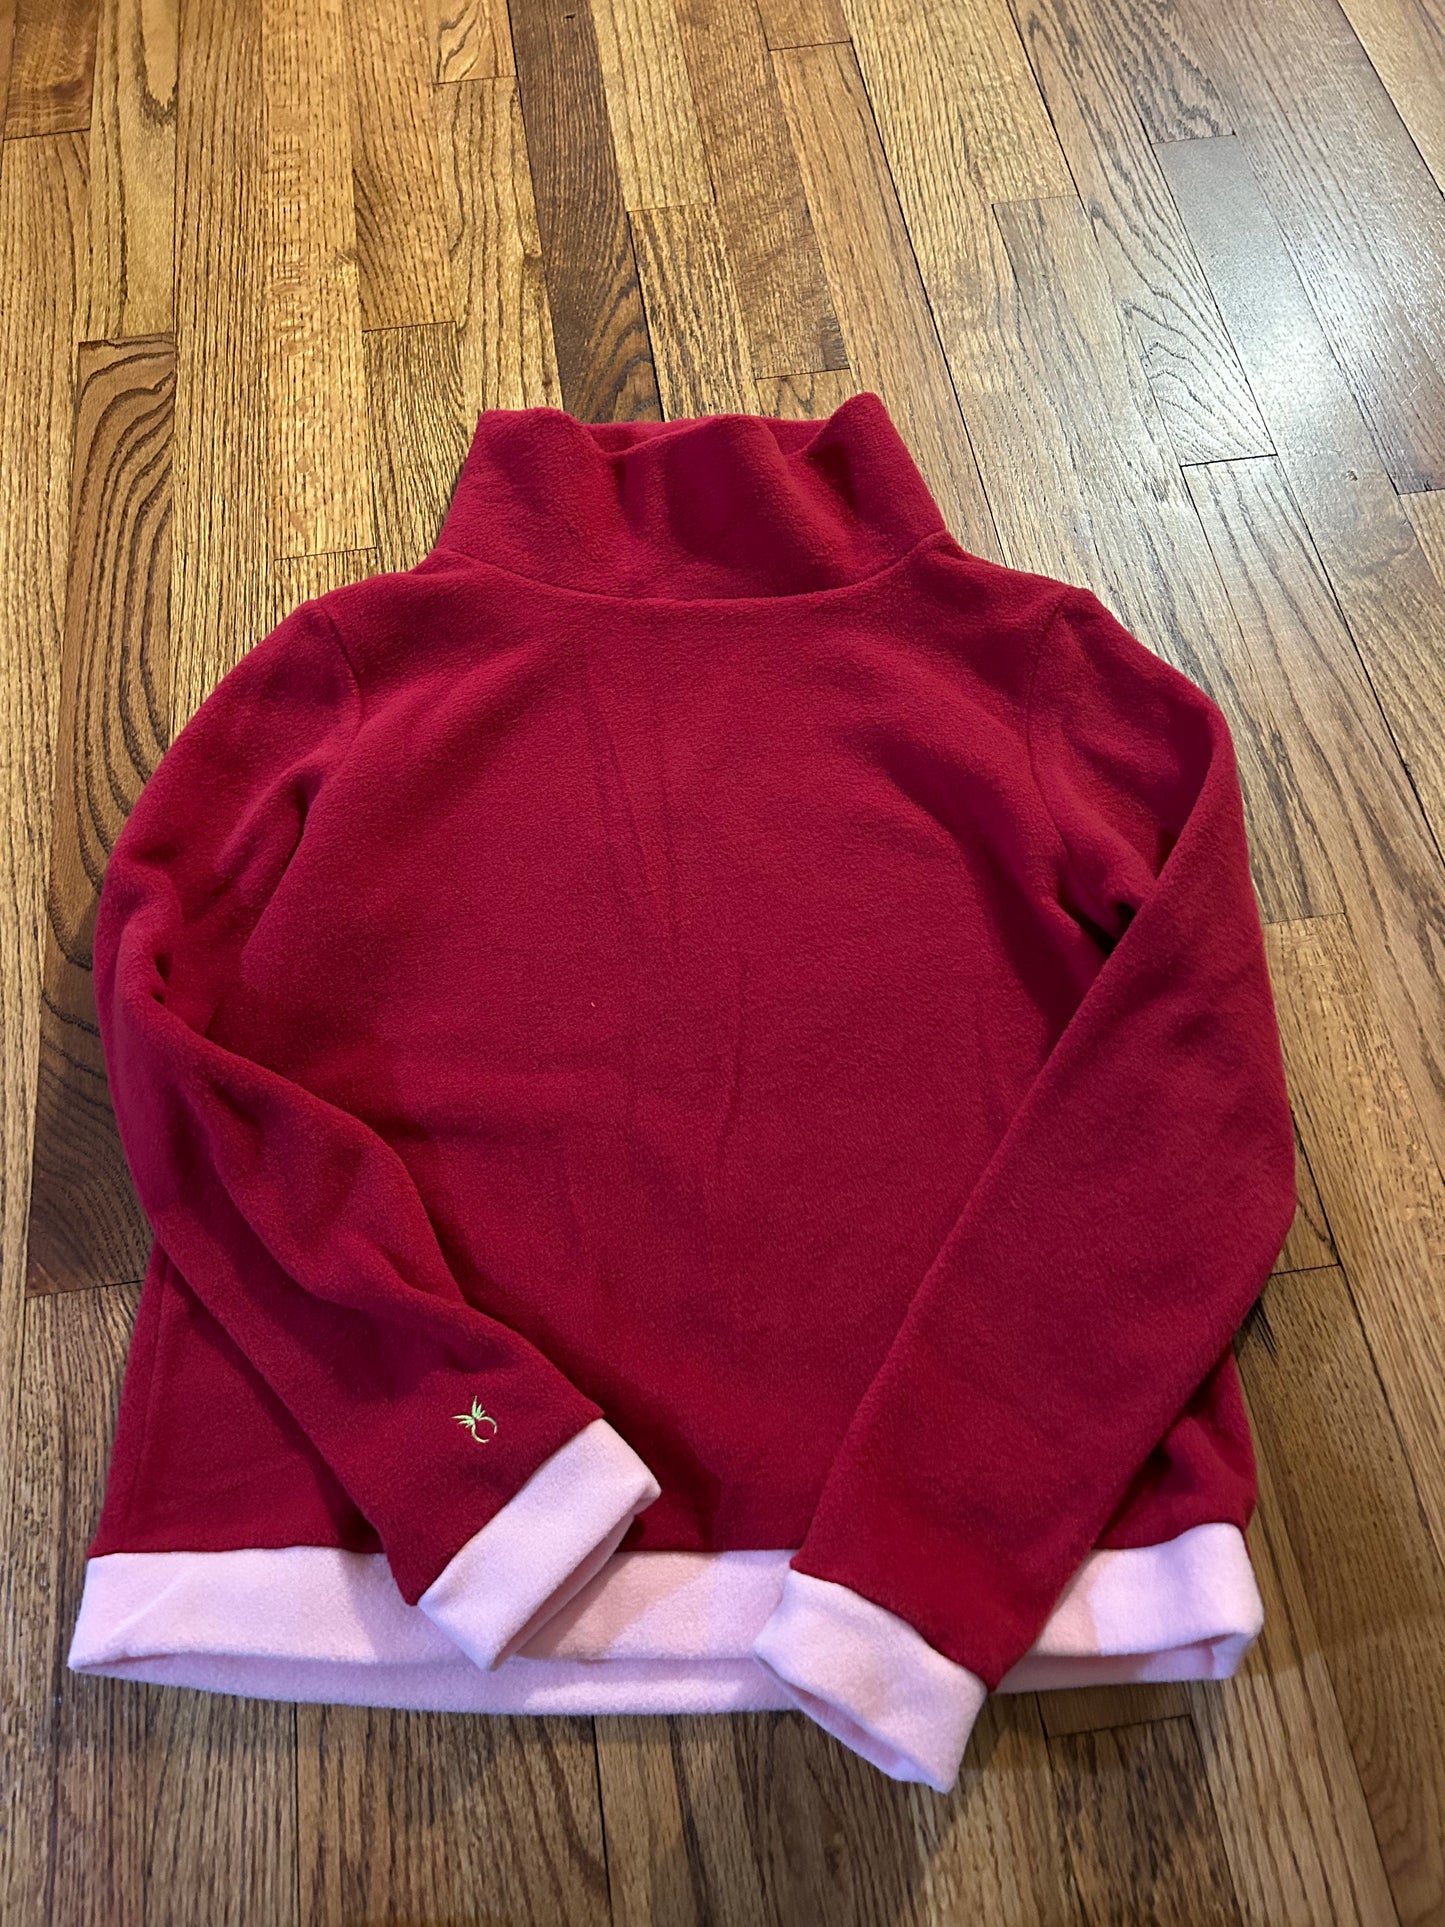 Dudley Stephens Red Fleece with Pink Trim - NWT - Size Medium